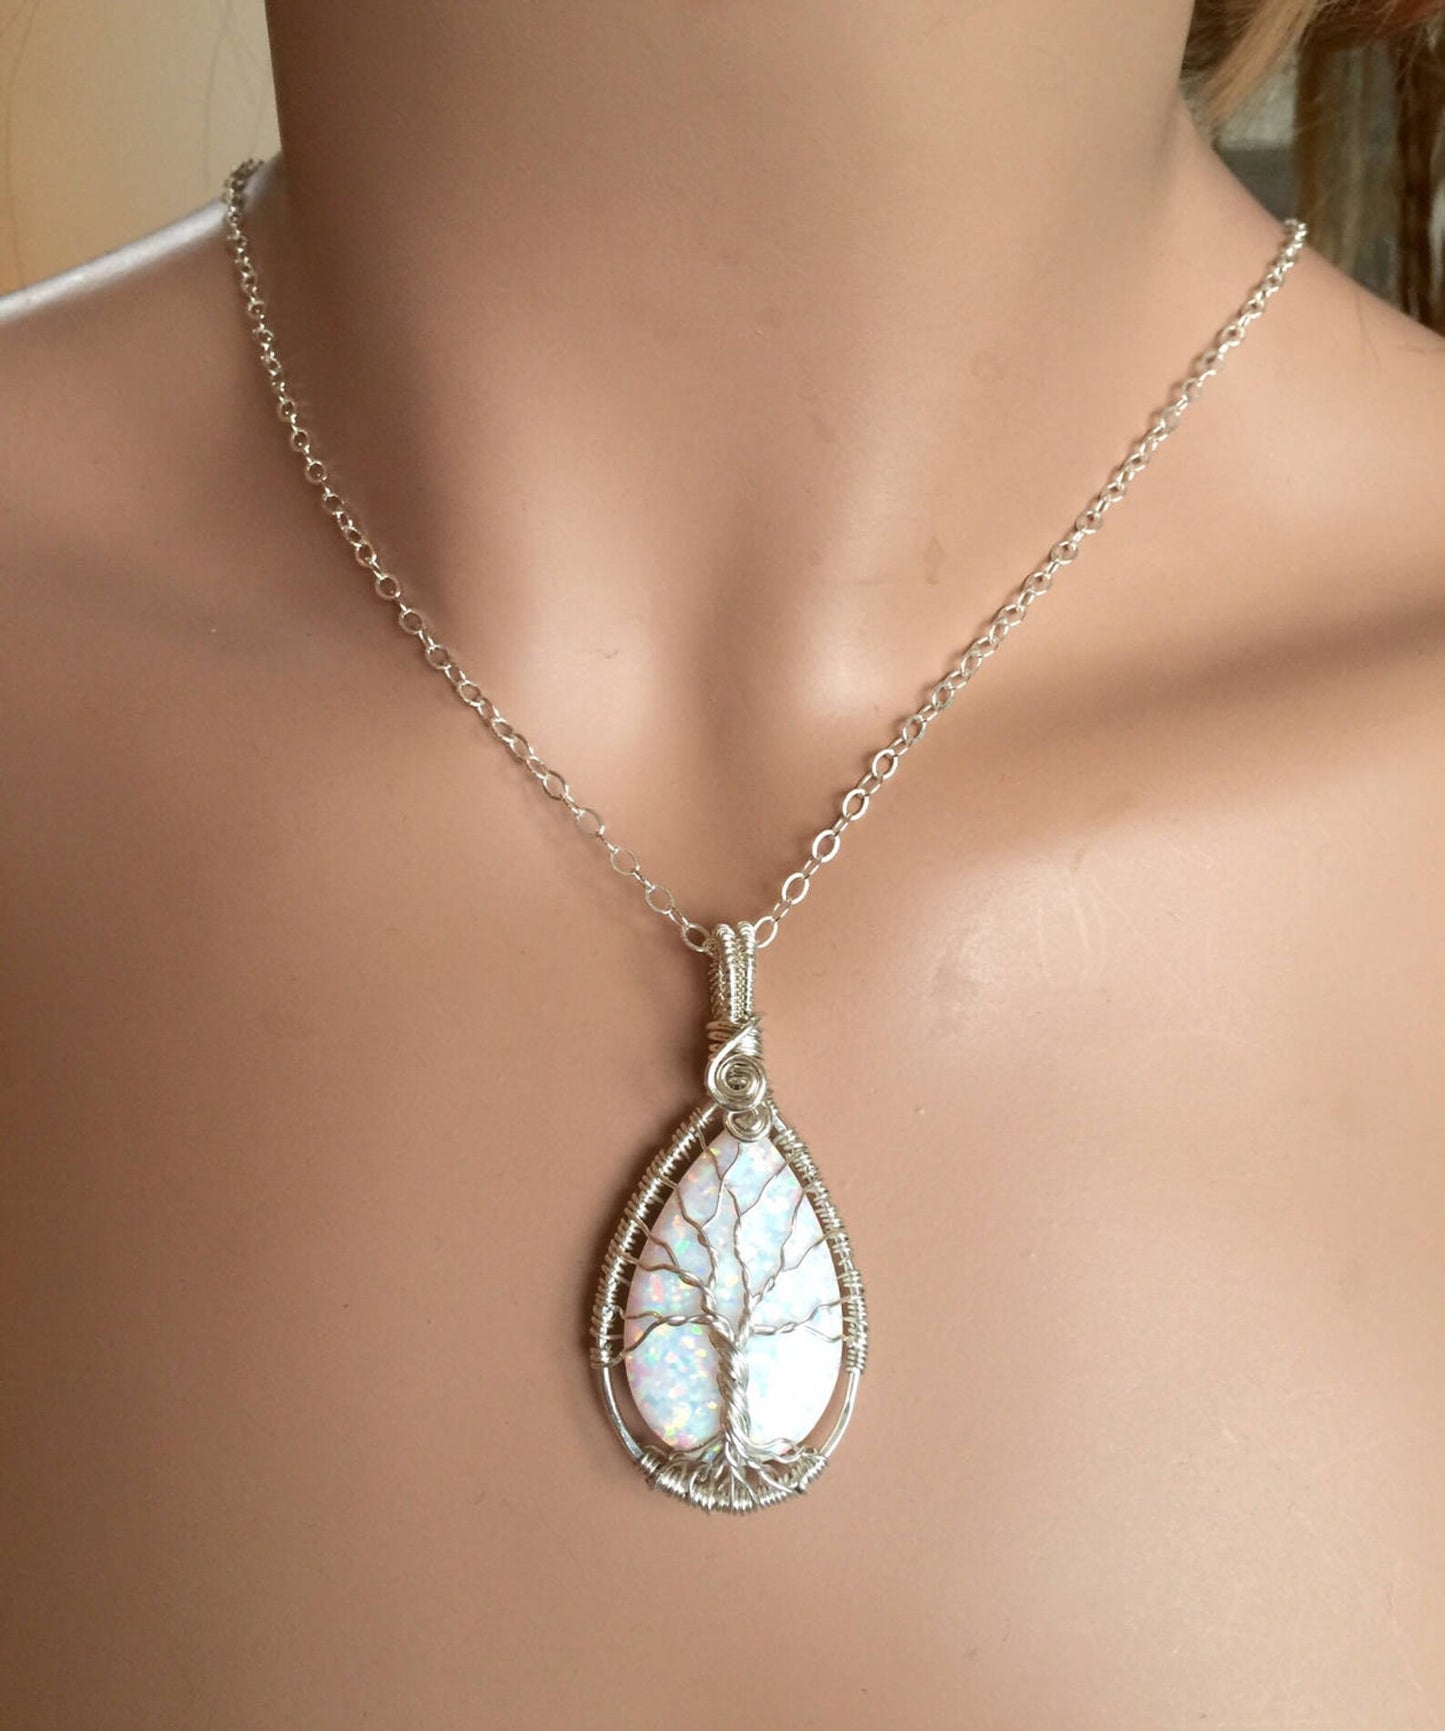 STERLING SILVER White Opal Necklace, Valentine Gift, October Birthstone Necklace, Opal Tree of Life Necklace